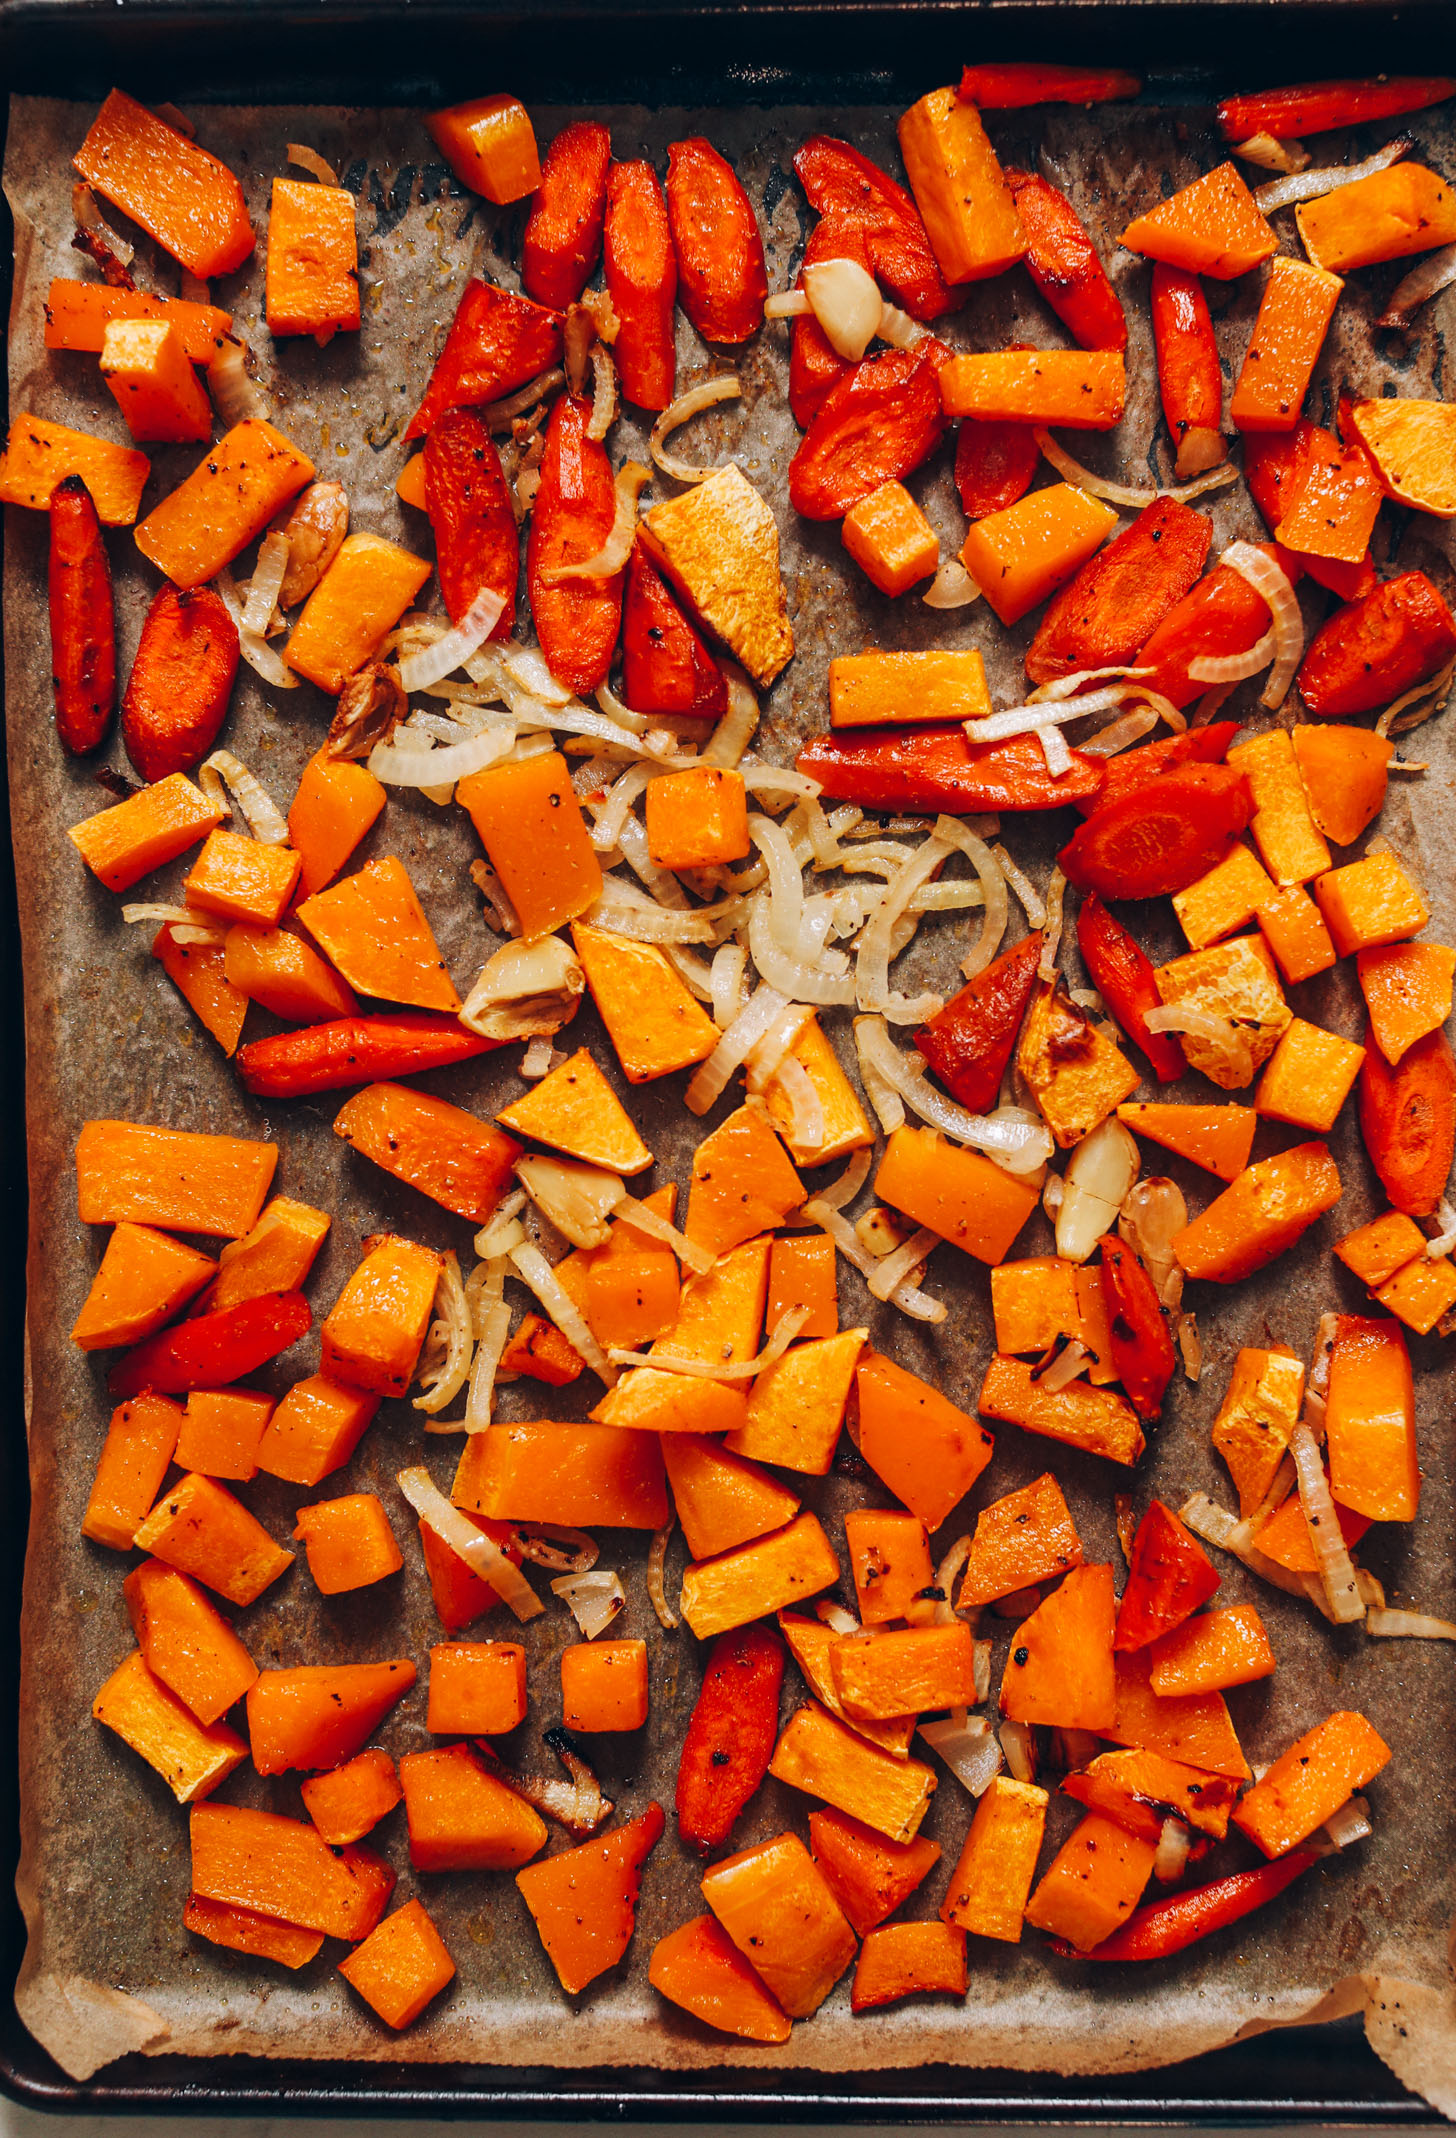 Baking sheet of roasted onion, garlic, carrots, and butternut squash